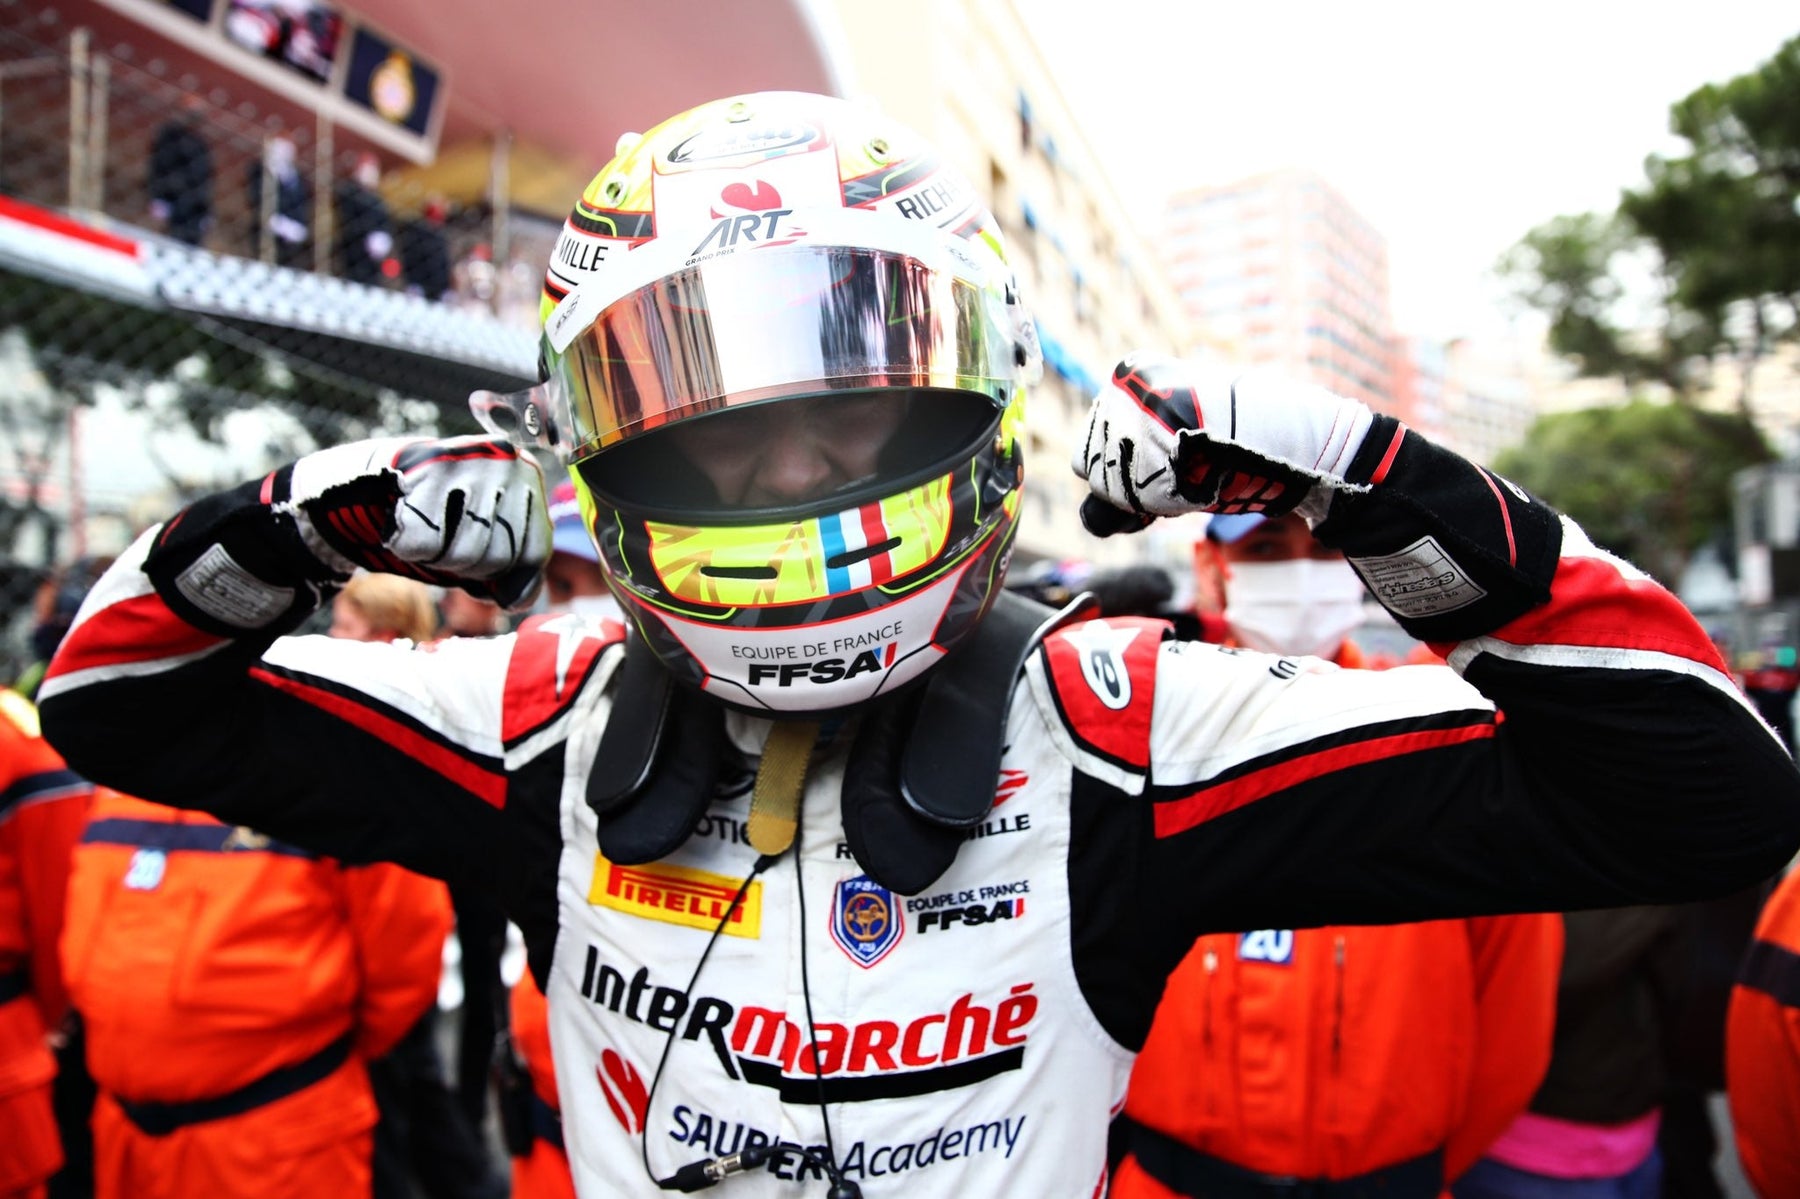 ALPINESTARS PODIUM LOCK-OUT AS THEO POURCHAIRE MAKES HISTORY IN F2 FEATURE RACE AT MONTE CARLO